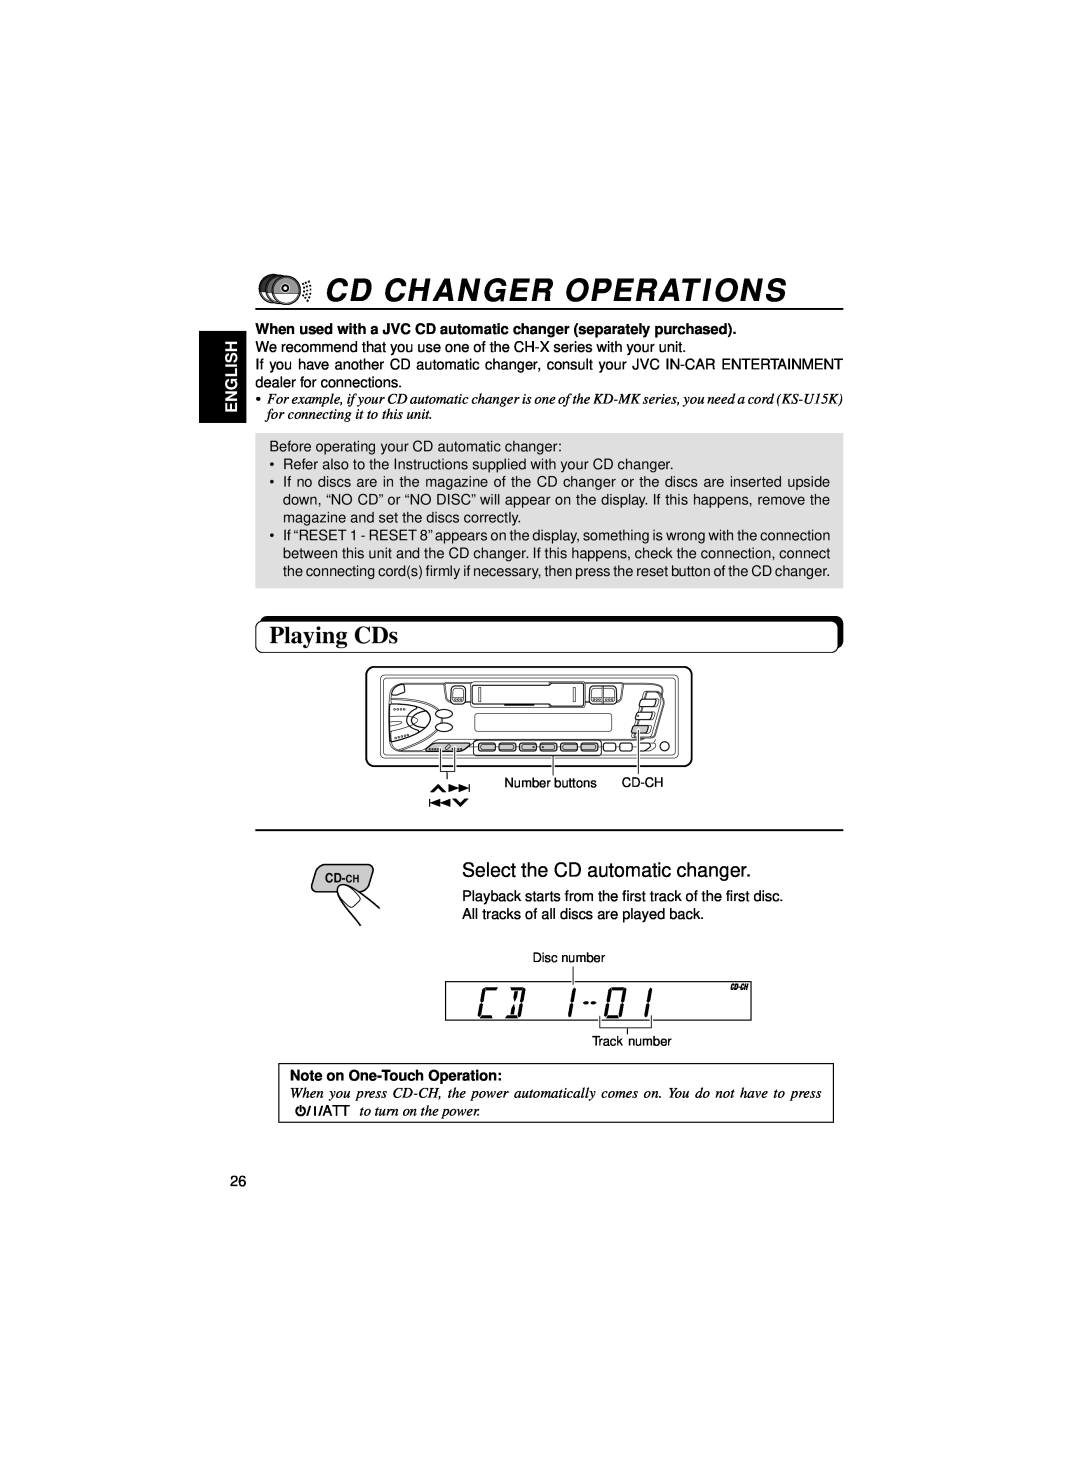 JVC KS-FX460R Cd Changer Operations, Playing CDs, Select the CD automatic changer, English, Note on One-TouchOperation 